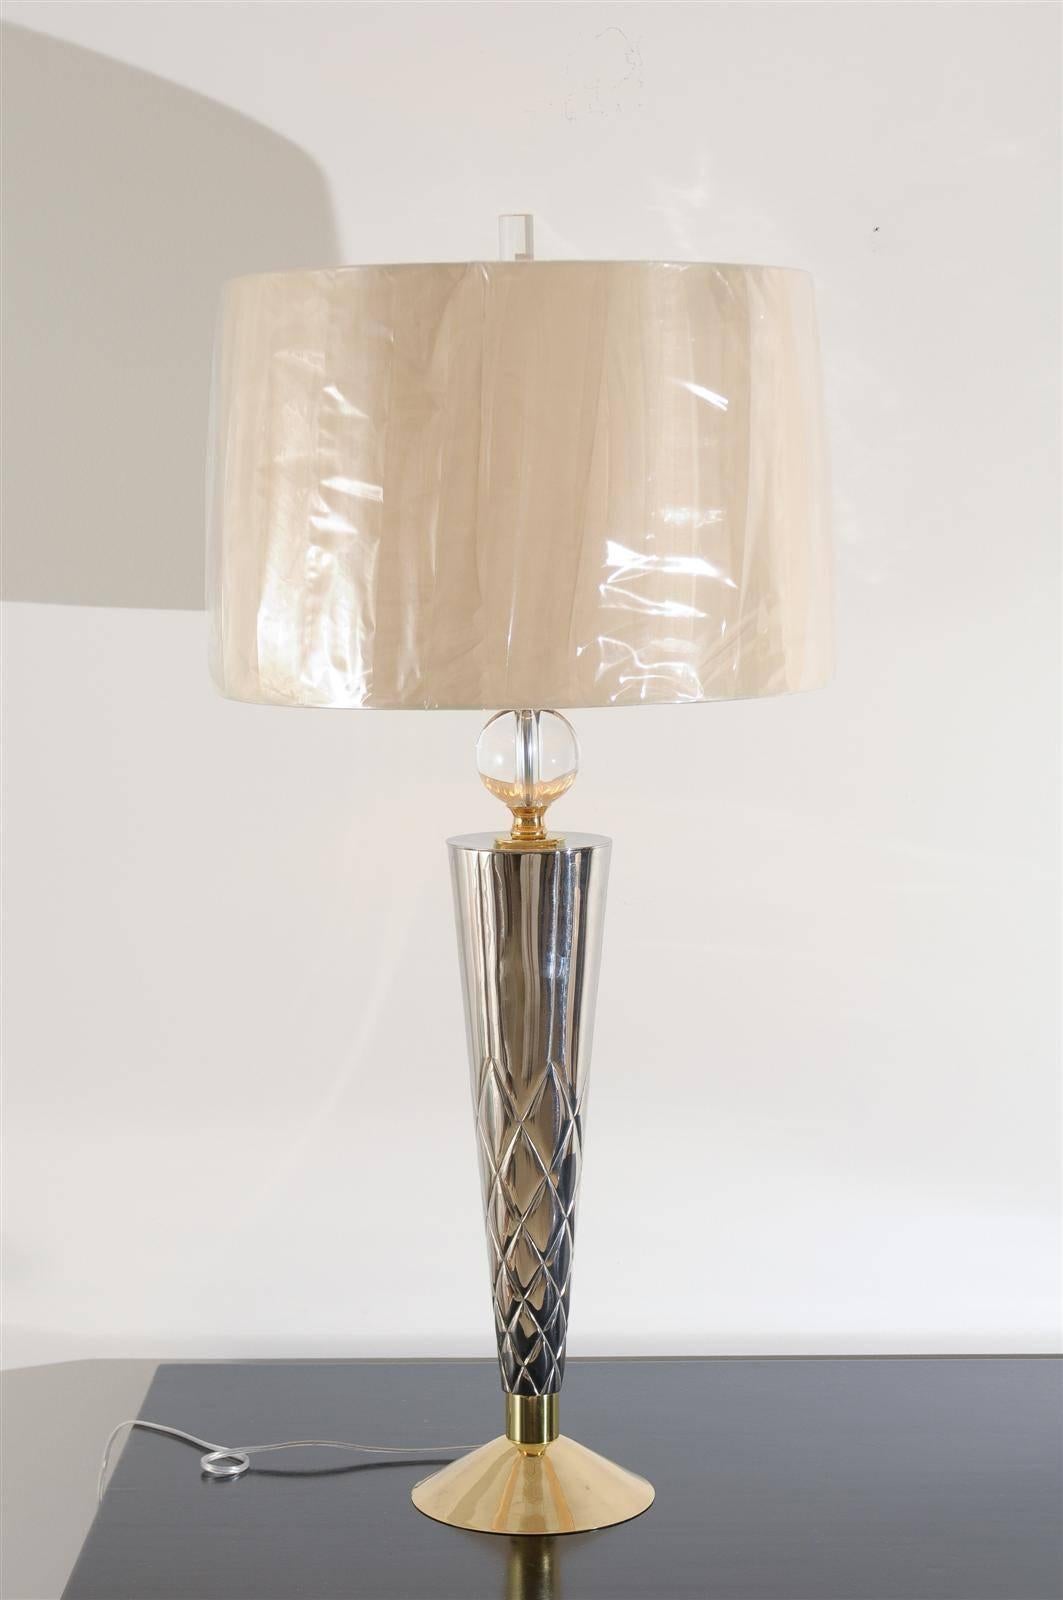 An exquisite pair of vintage tornado style lamps, circa 1960. Crystal ball atop solid bronze structure, components finished in nickel and brass. Exceptional weight, detail, quality and scale. Sublime jewelry! Excellent restored condition. Rewired